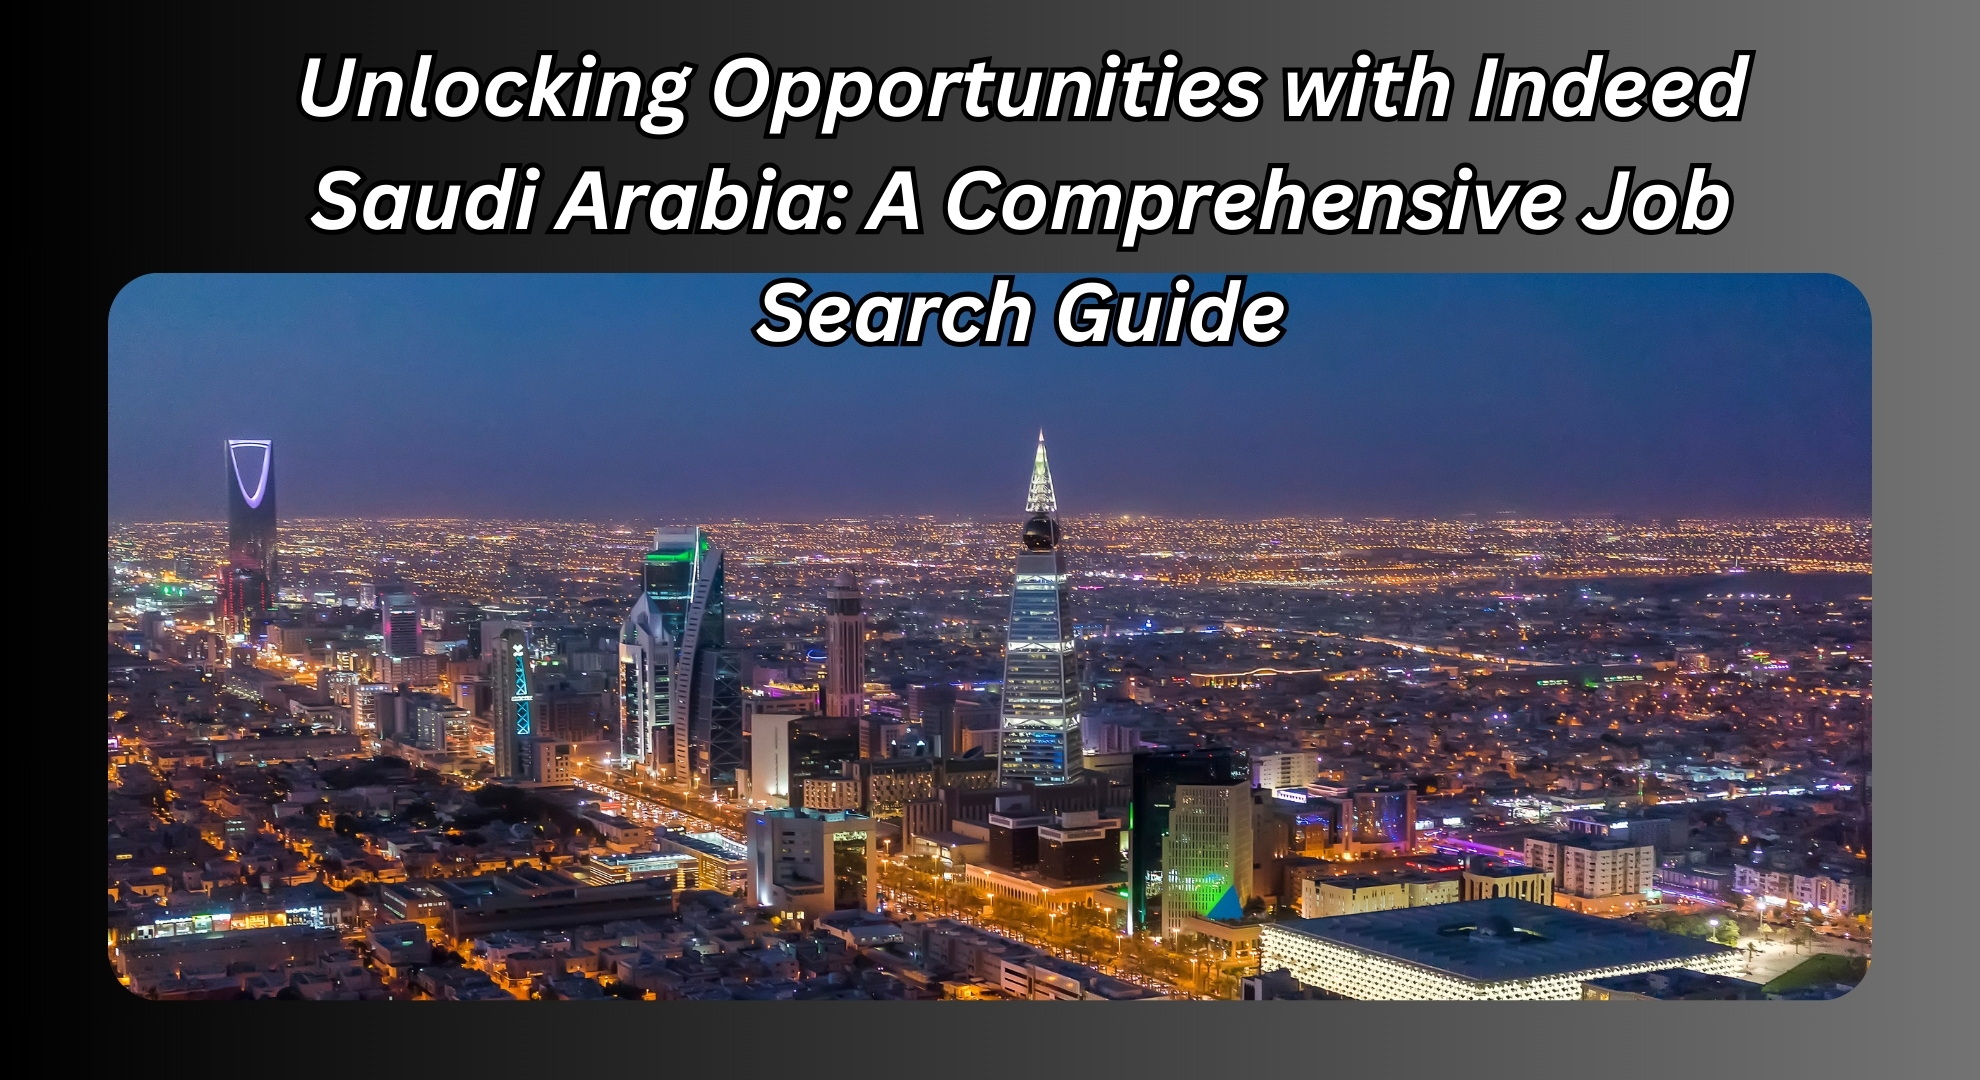 Unlocking Opportunities with Indeed Saudi Arabia: A Comprehensive Job Search Guide